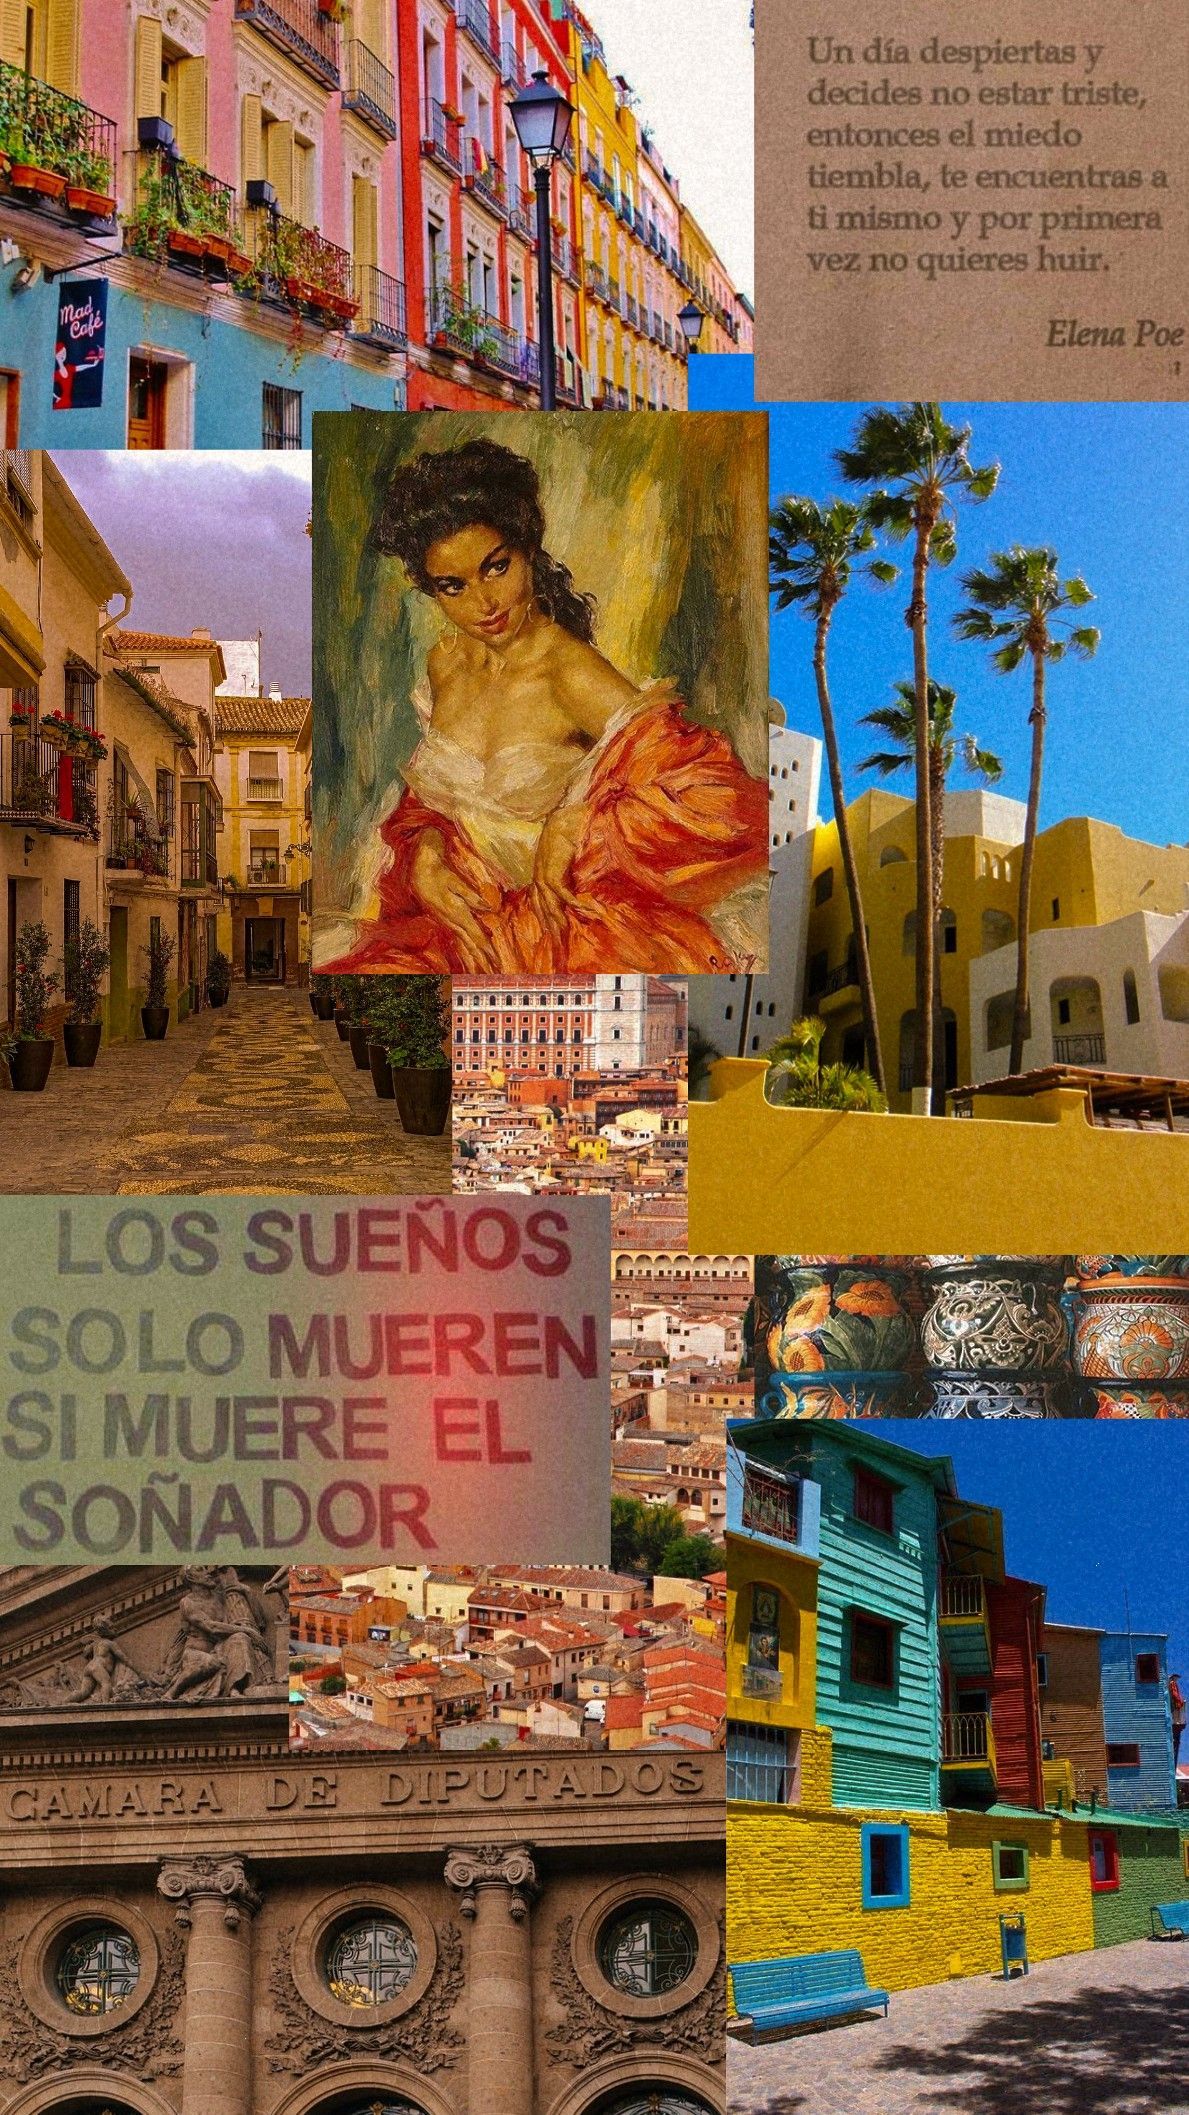 Aesthetic Spanish Words Wallpapers